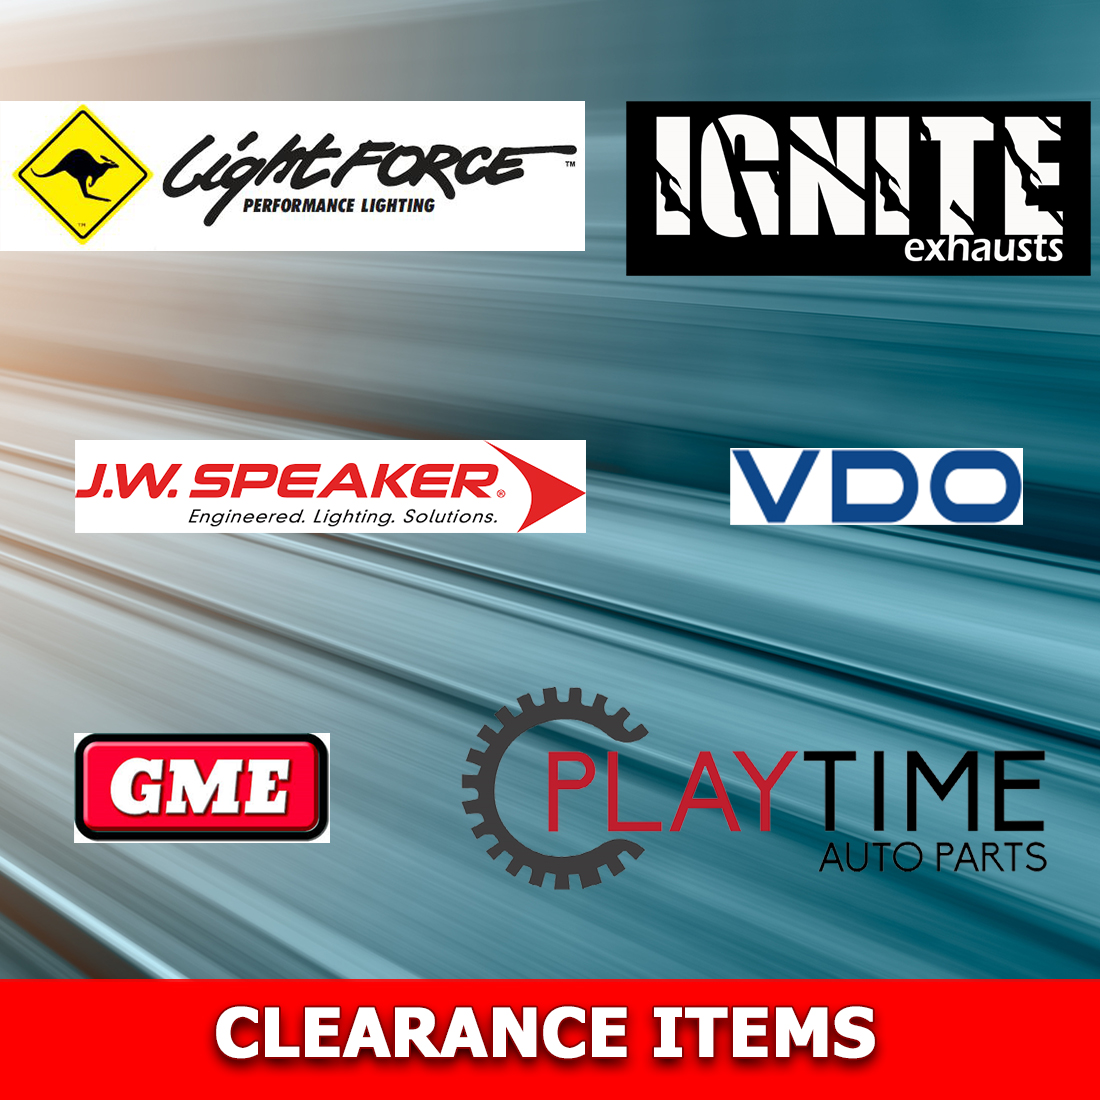 Playtime Auto Parts. Clearance Items.